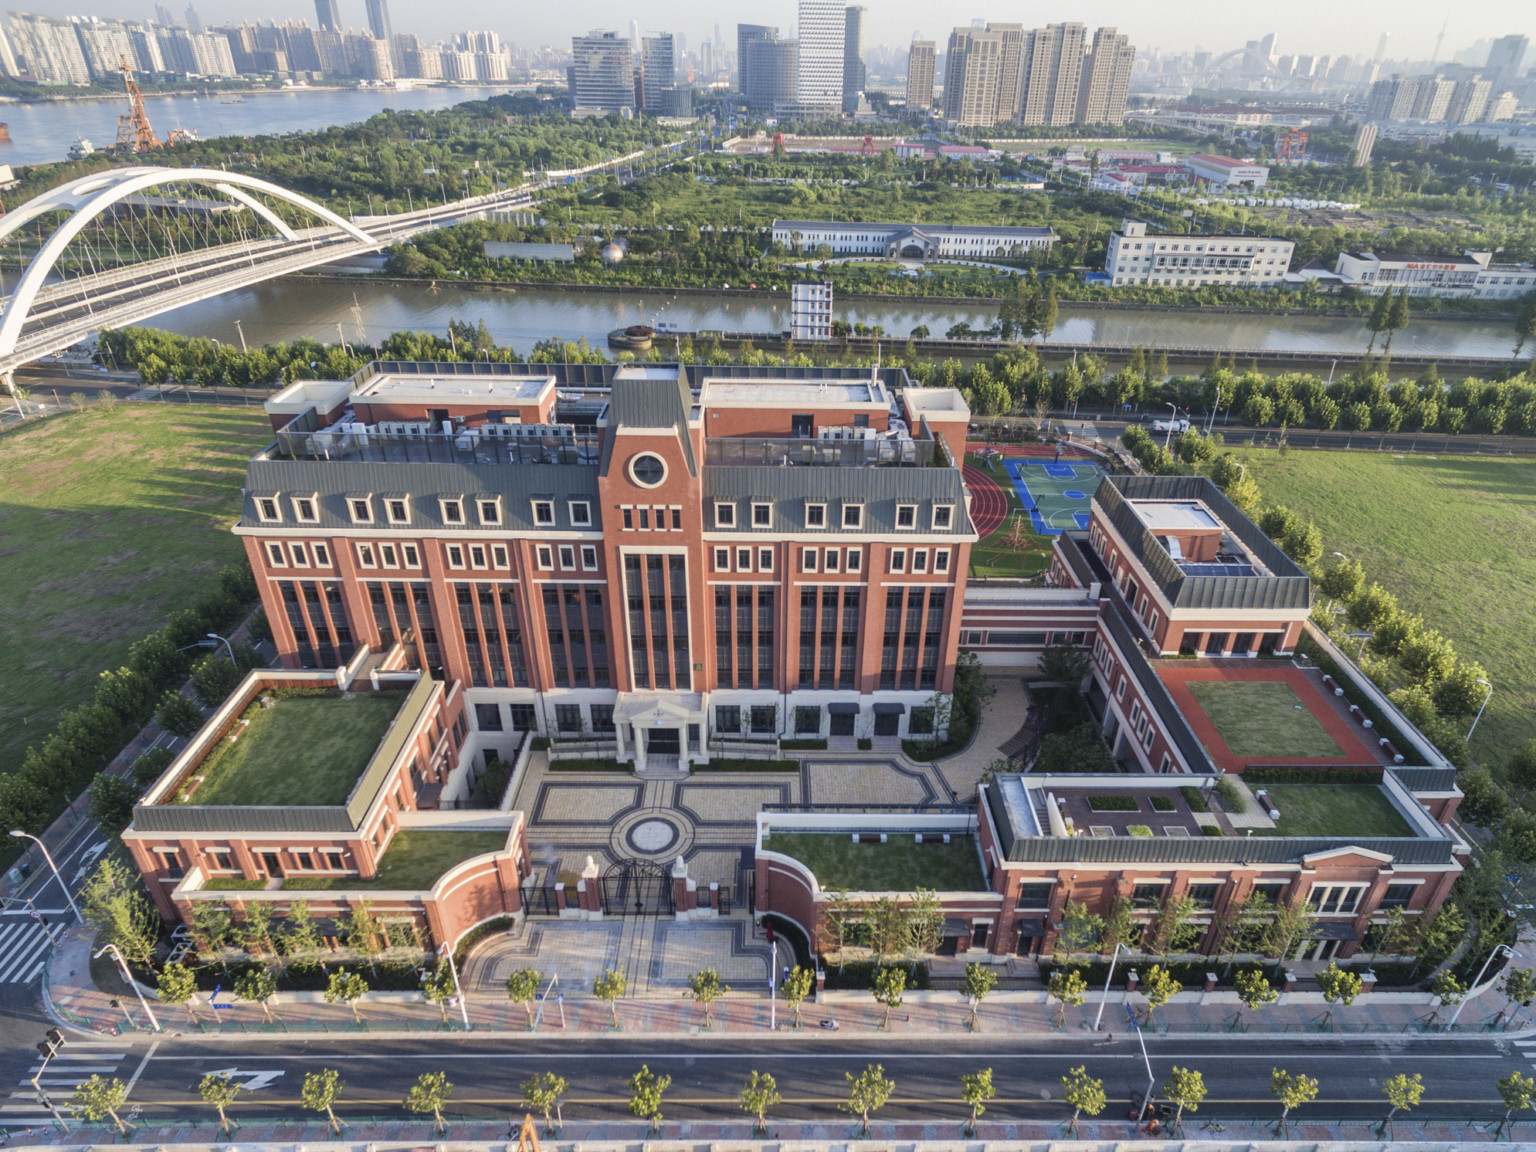 Aerial view of the campus from the front. A gated stone courtyard is surrounded by brick buildings with living roof sections